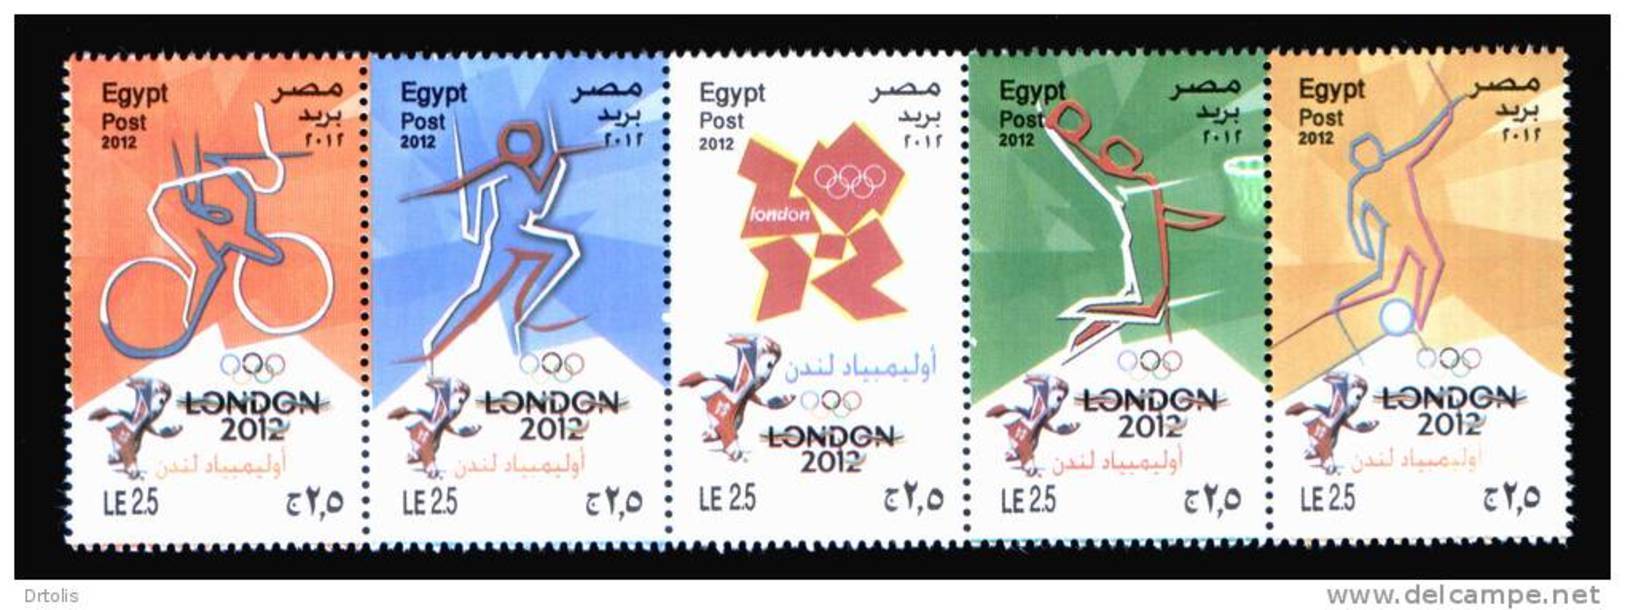 EGYPT / 2012 / COMPLETE YEAR ISSUES  / MNH / VF/ 7 SCANS . - Unused Stamps